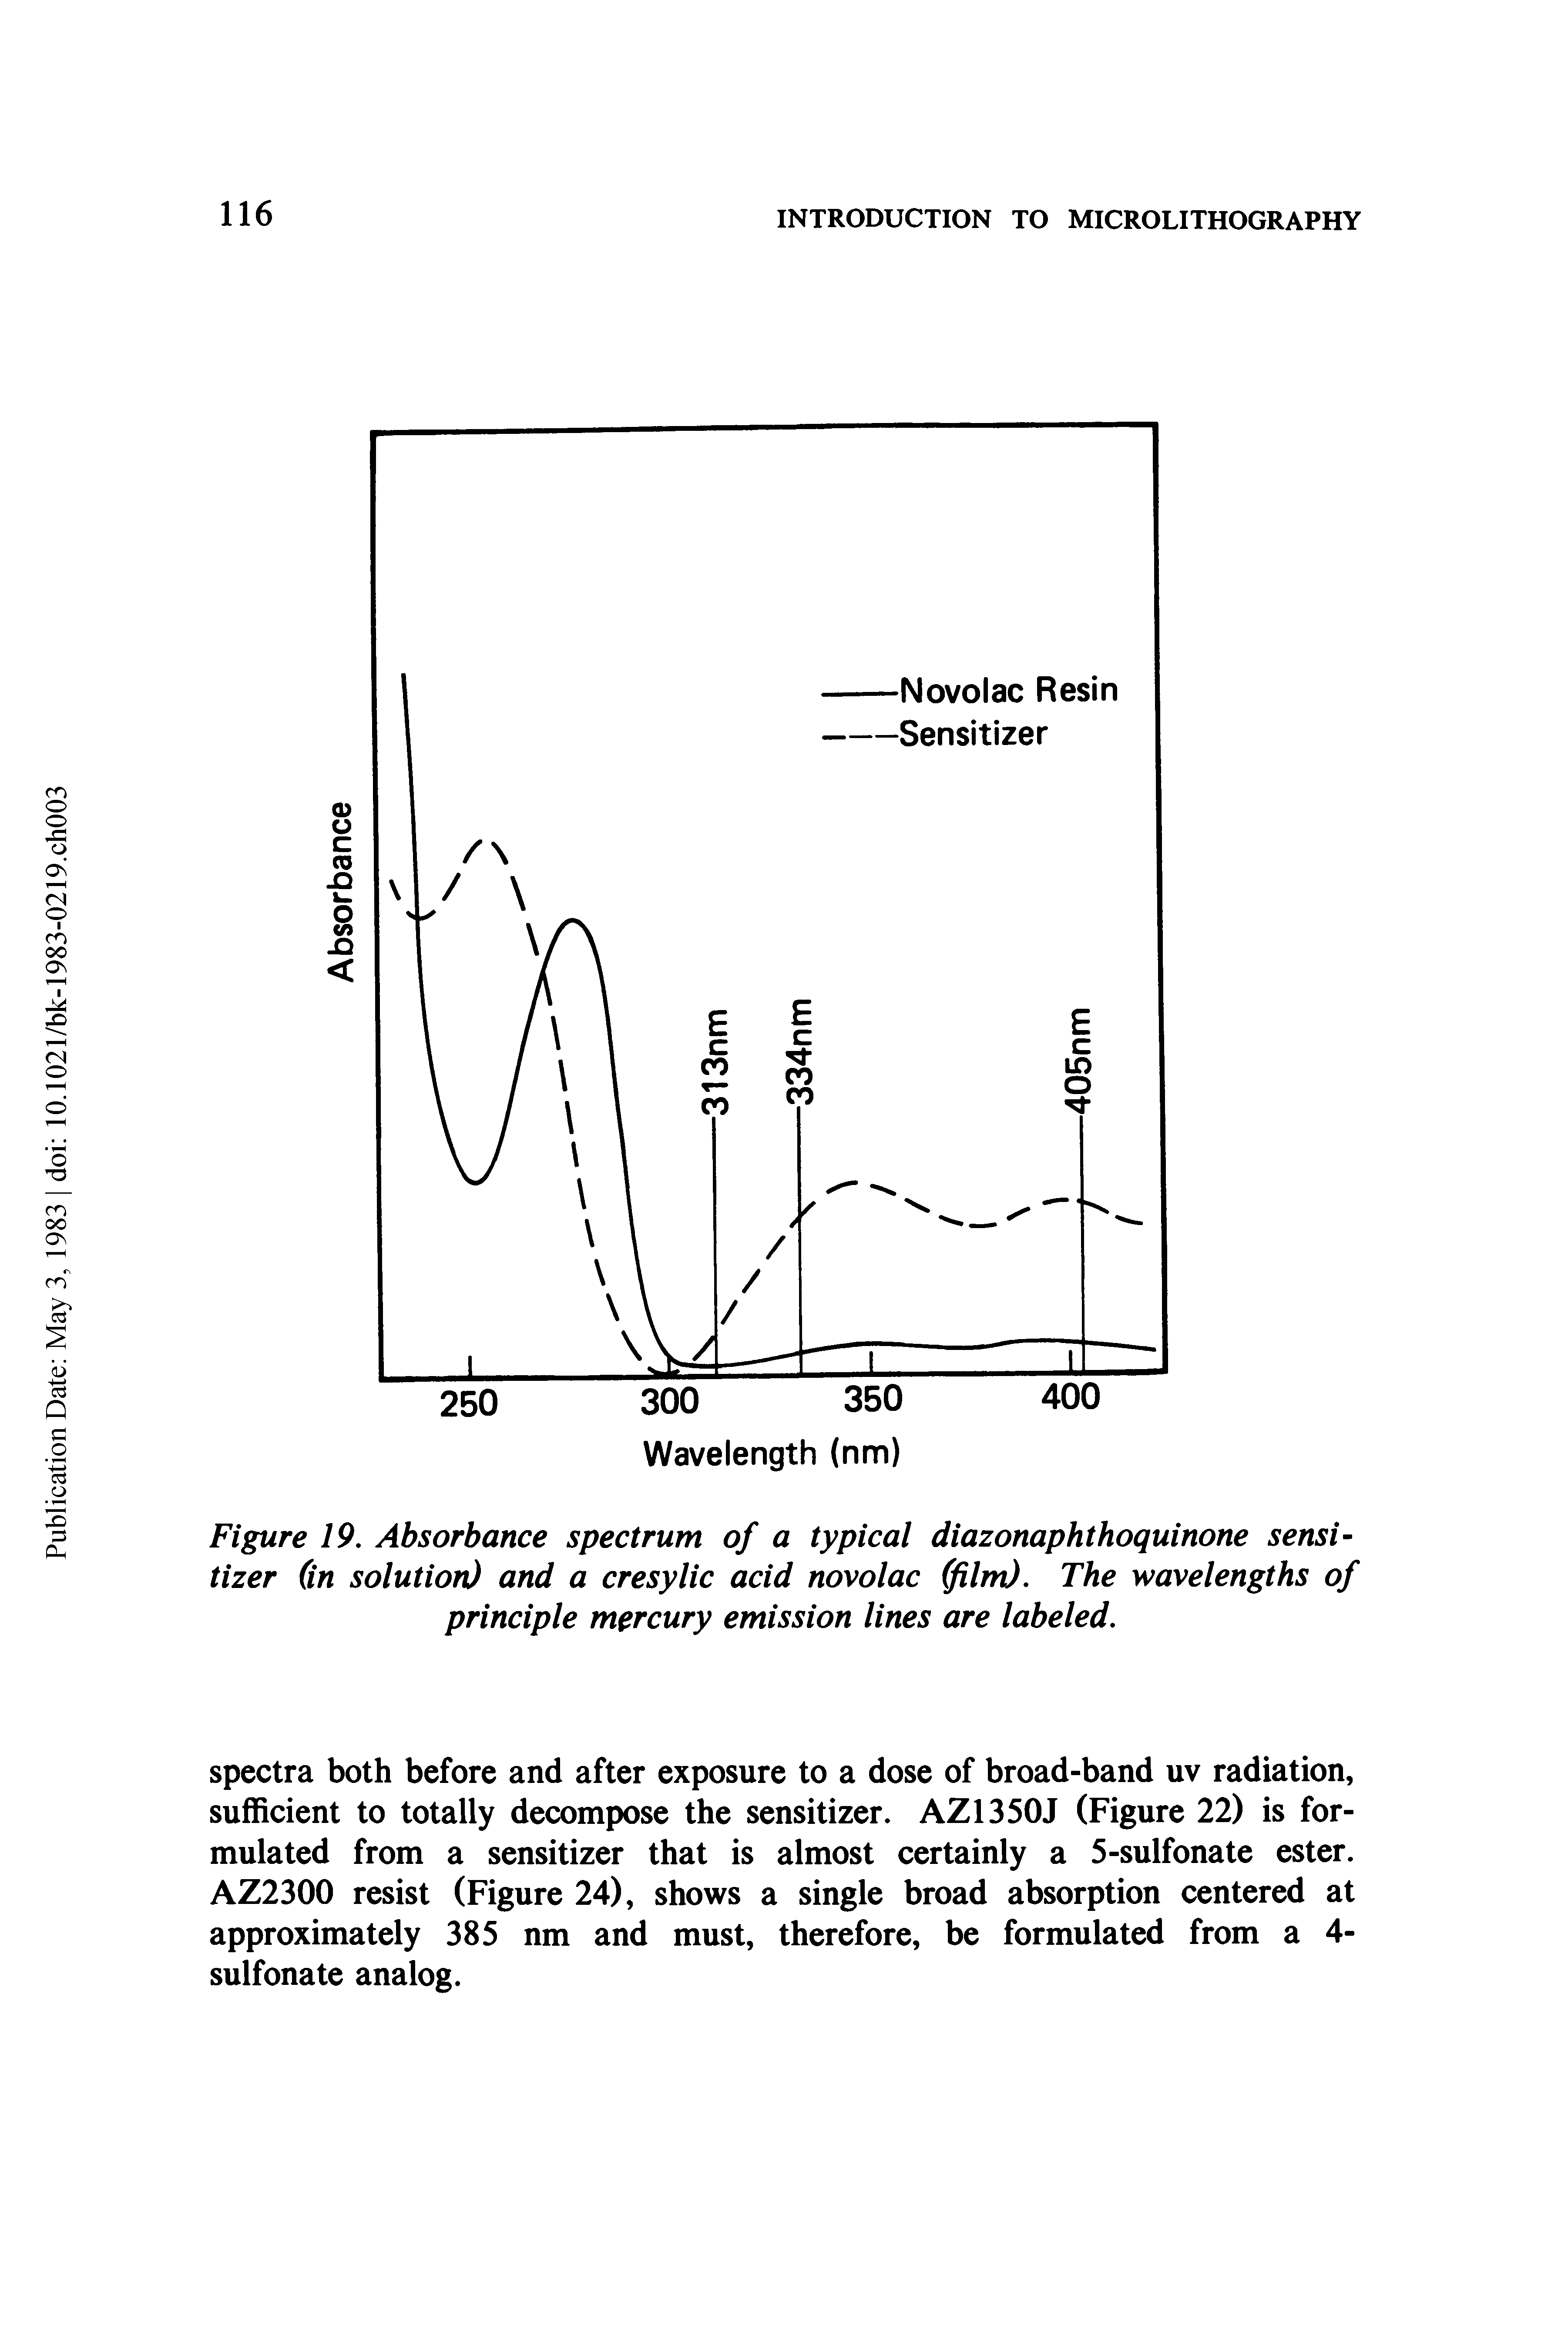 Figure 19. Absorbance spectrum of a typical diazonaphthoquinone sensitizer (in solution) and a cresylic acid novolac (film). The wavelengths of principle mercury emission lines are labeled.